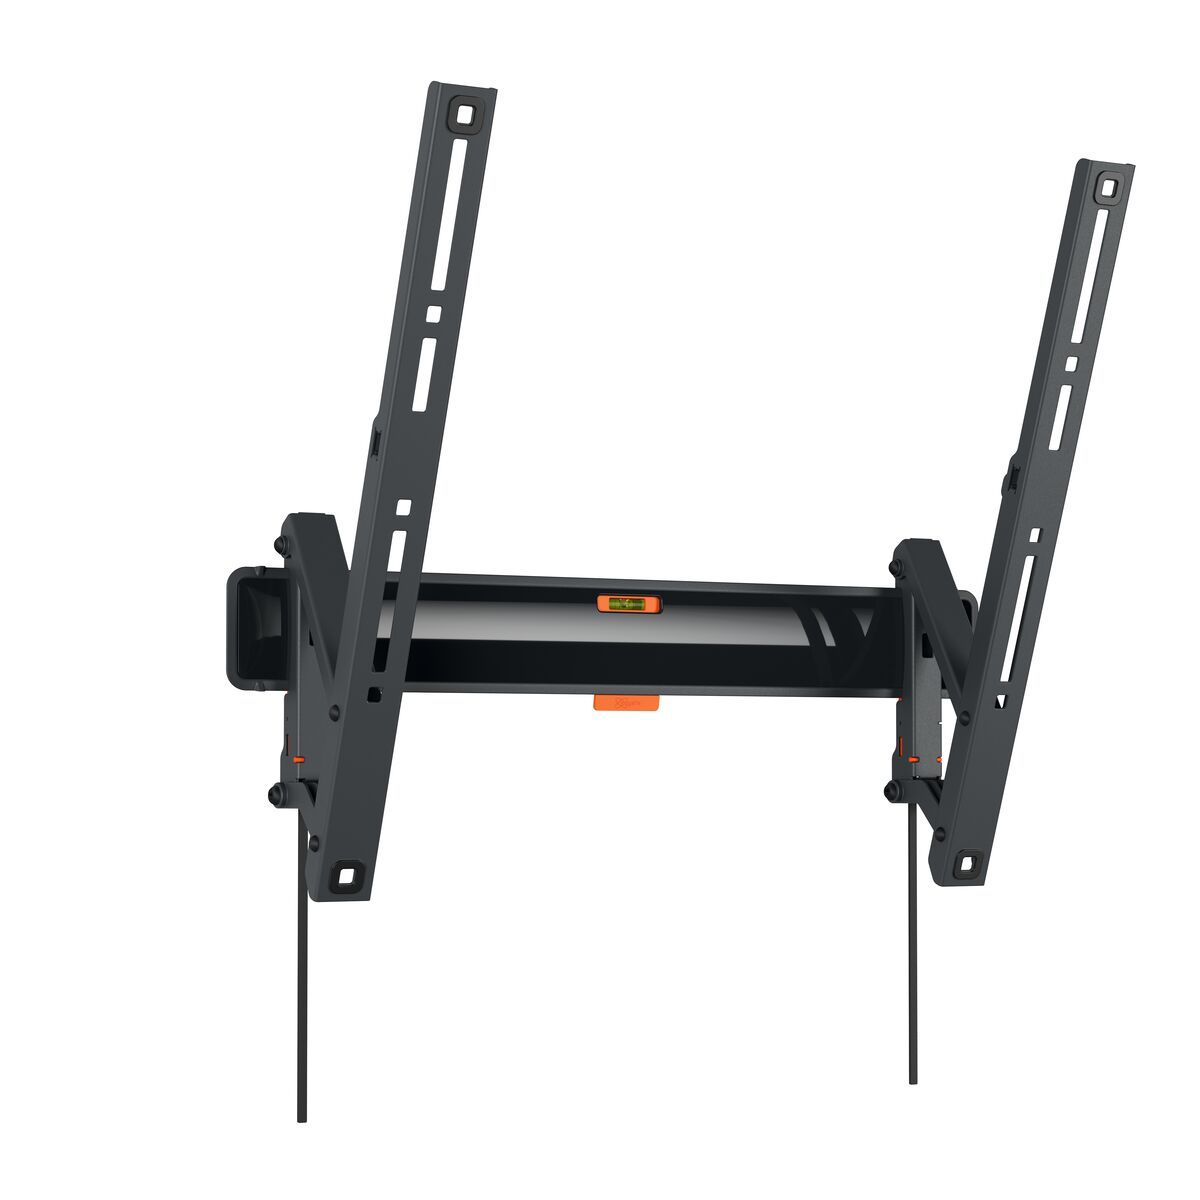 Vogel's TVM 3413 Tilting TV Wall Mount - Suitable for 32 up to 65 inch TVs - Tilt up to 20° - Product